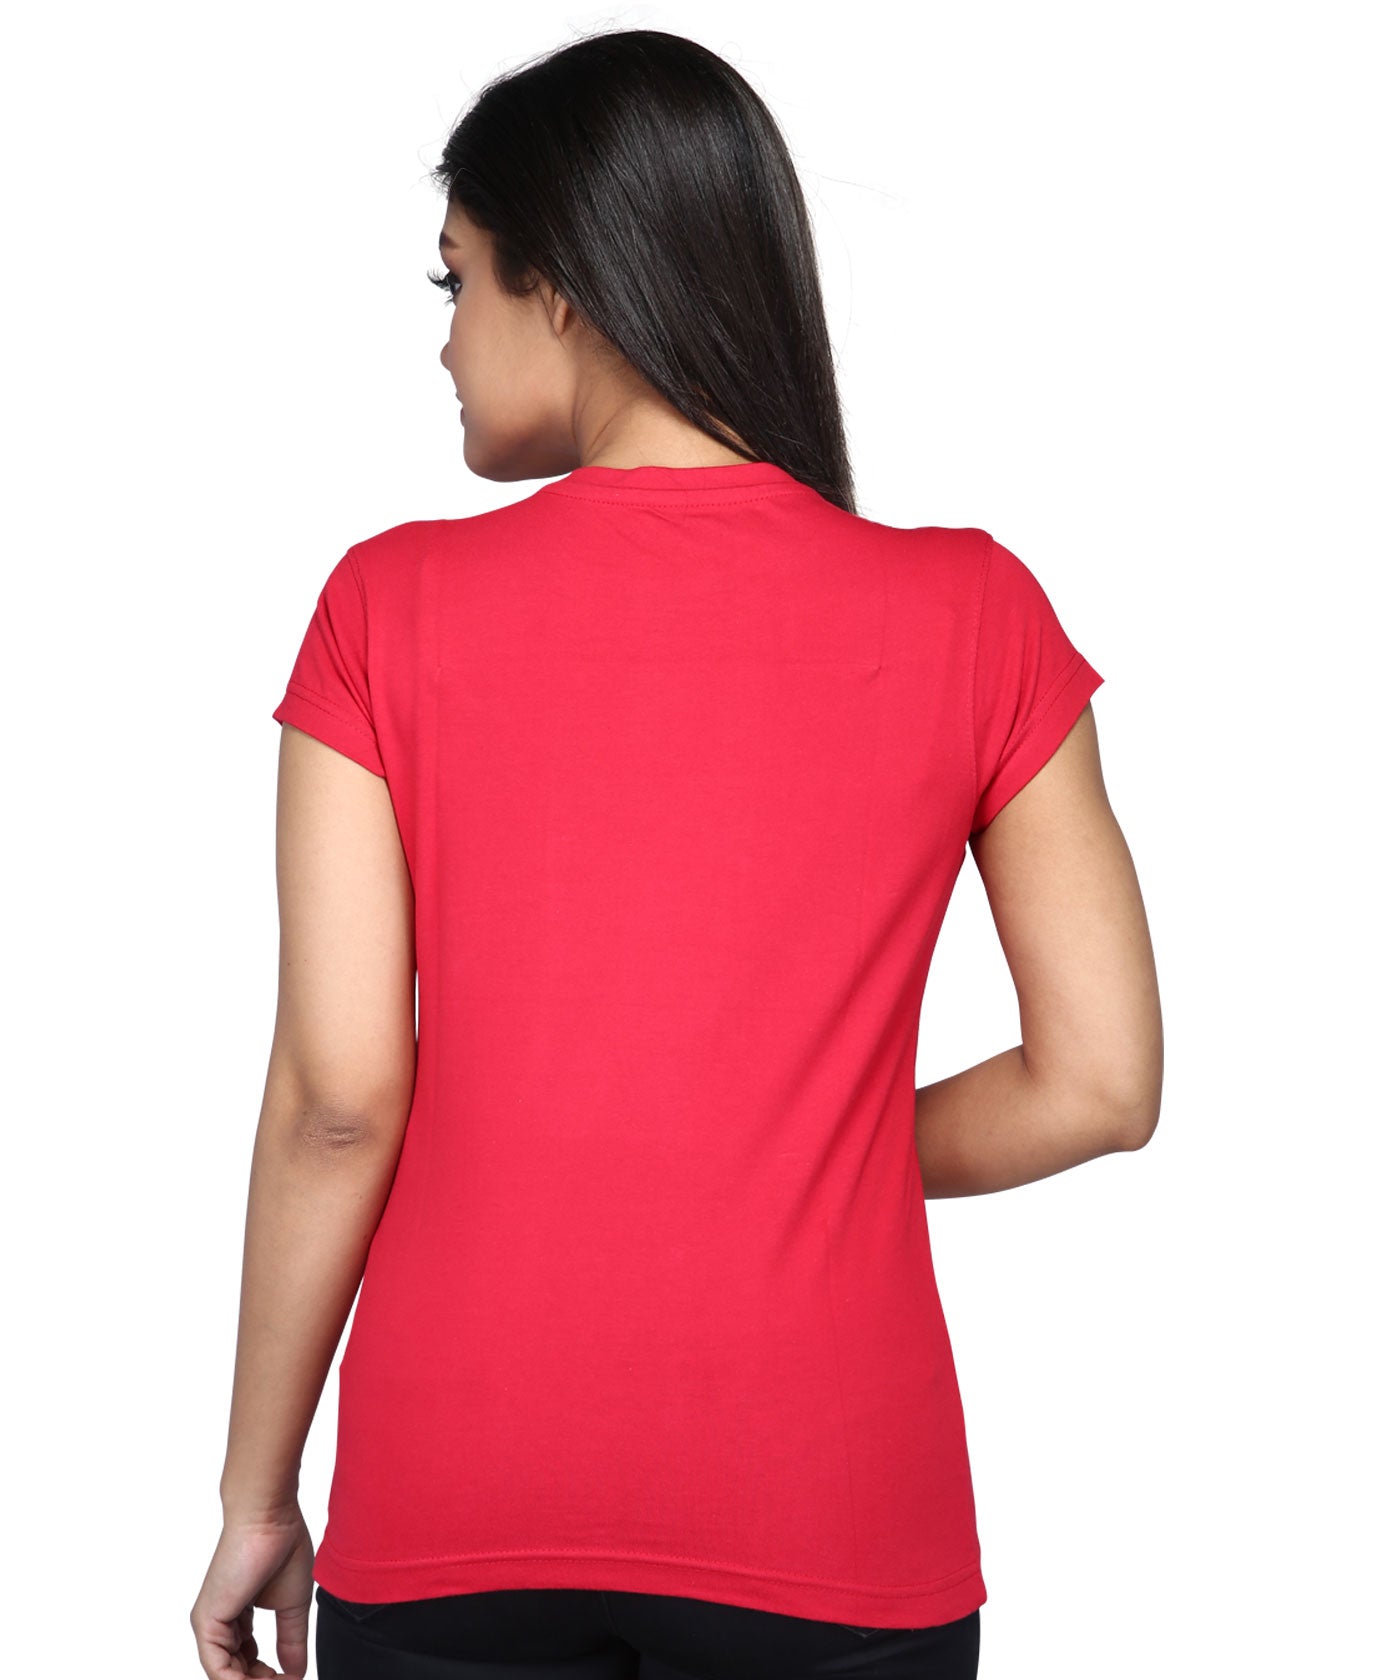 Musical Harmony - Premium Round Neck Cotton Tees for Women - Red